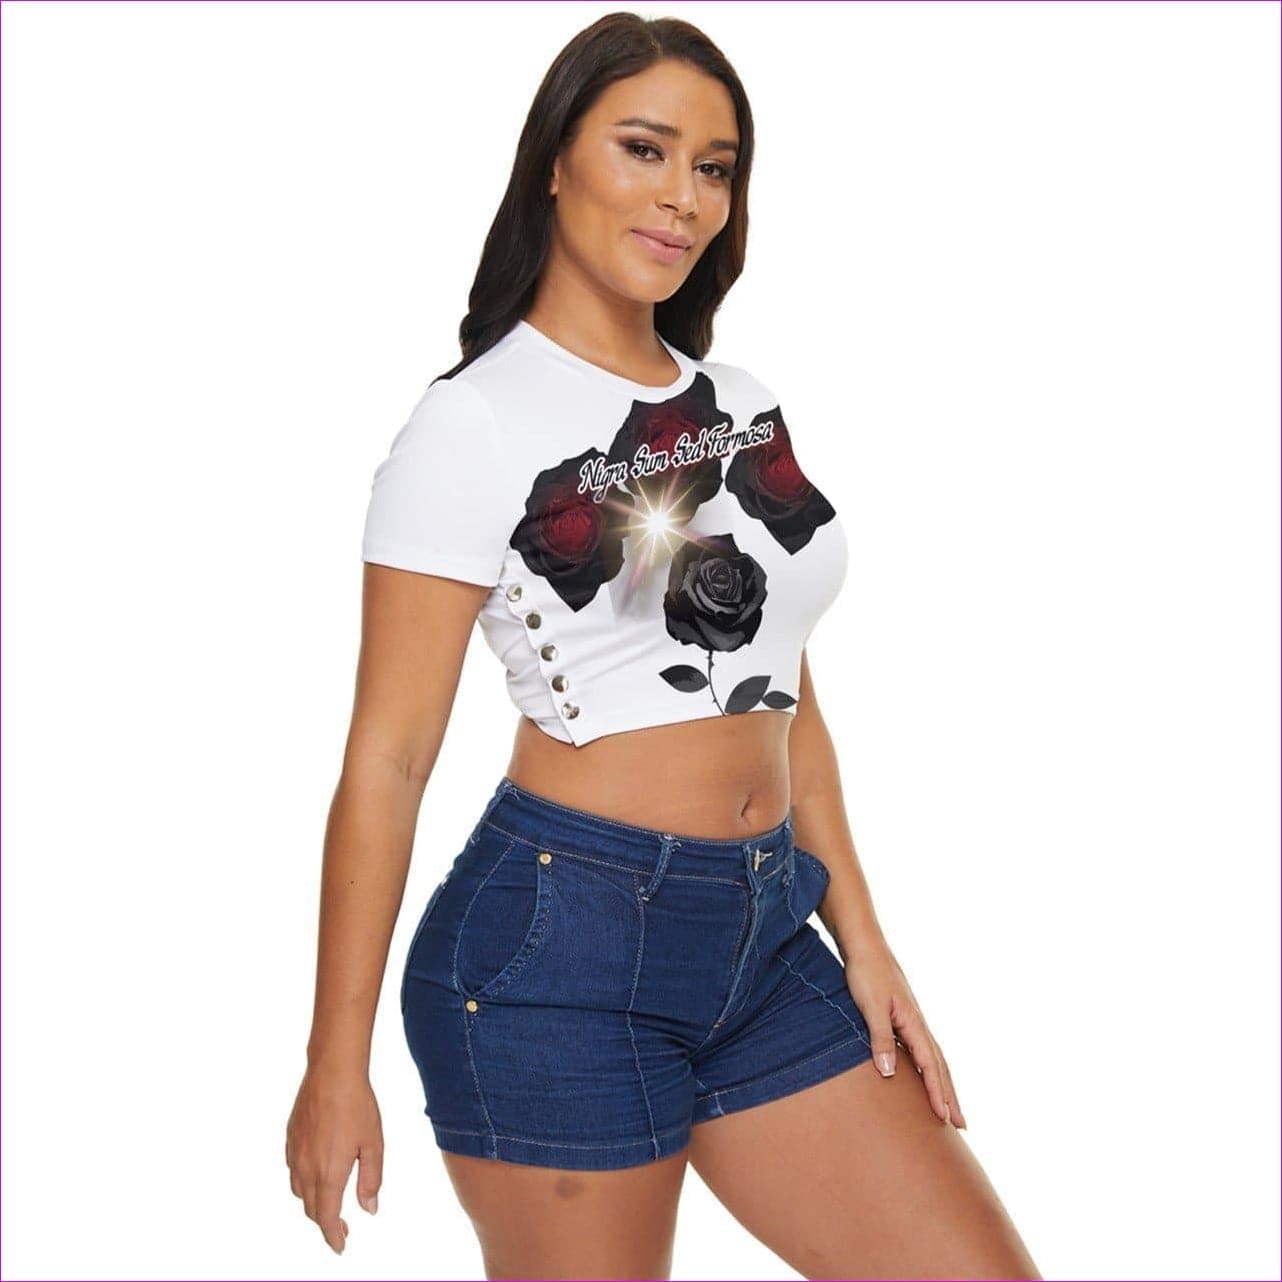 Nigra Sum Sed Formosa Side Button Cropped Tee Voluptuous (+) Size Available - women's crop top at TFC&H Co.